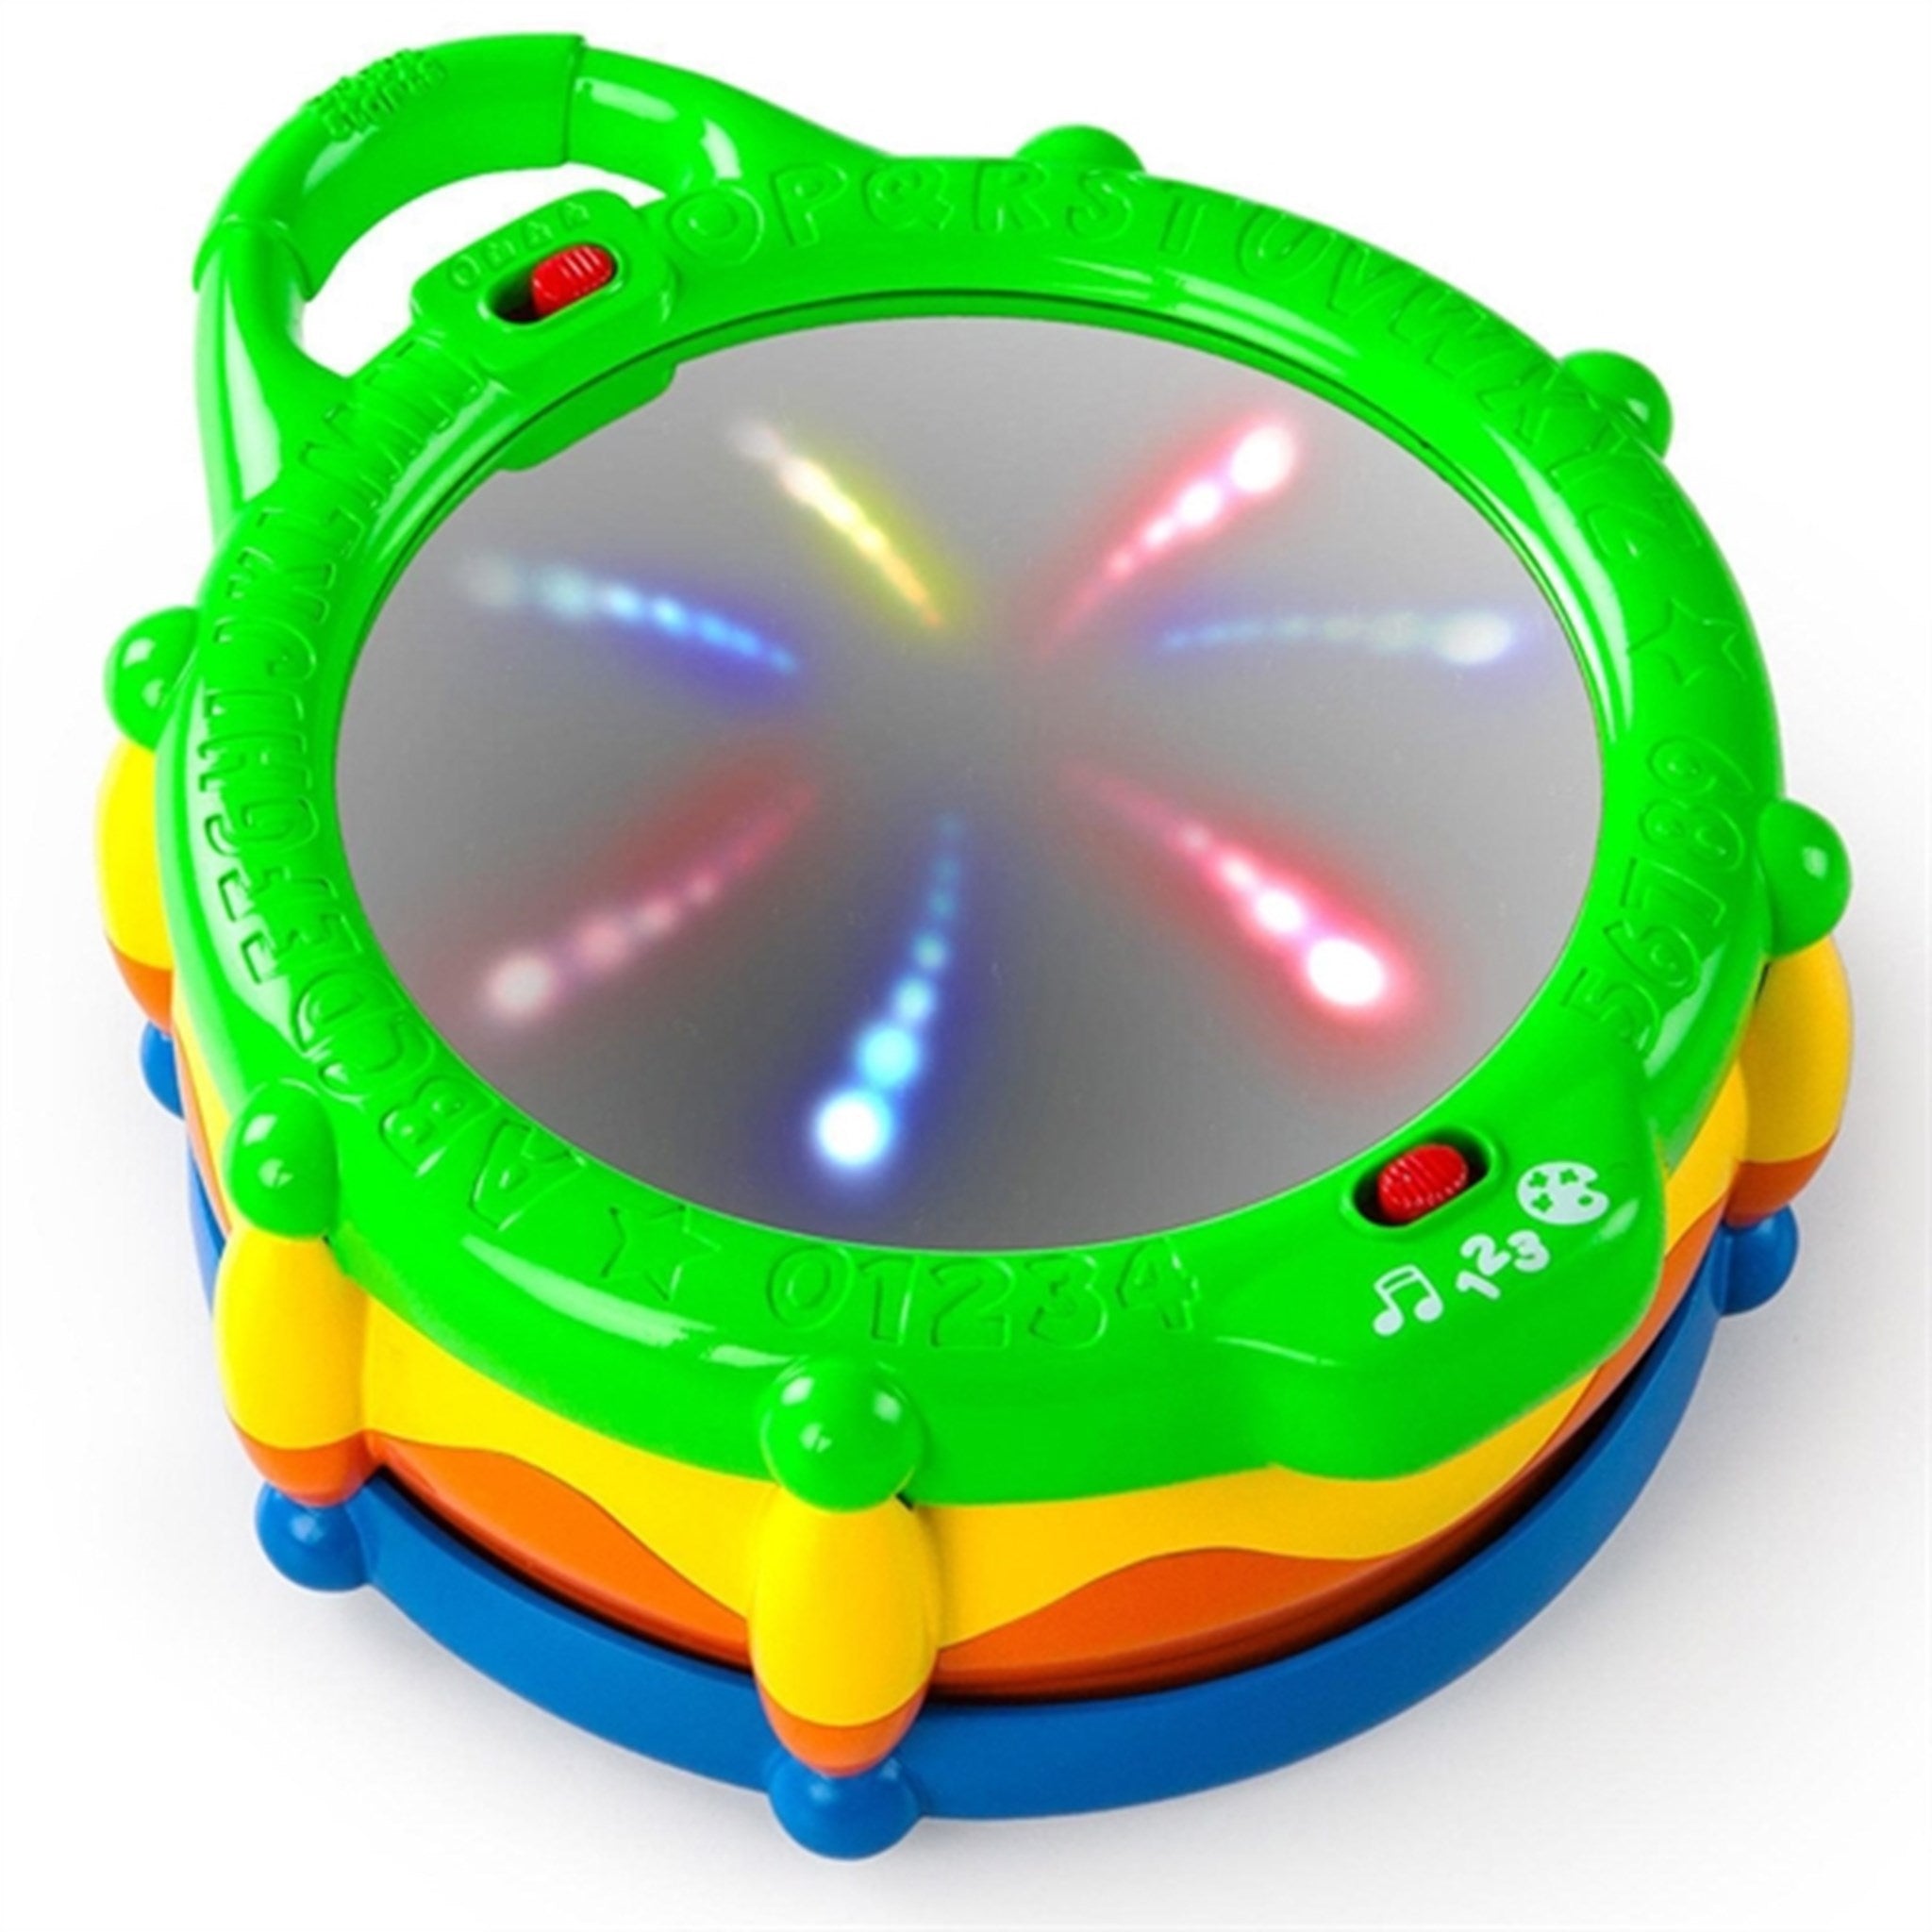 Bright Starts Play Drum with Sound and Light